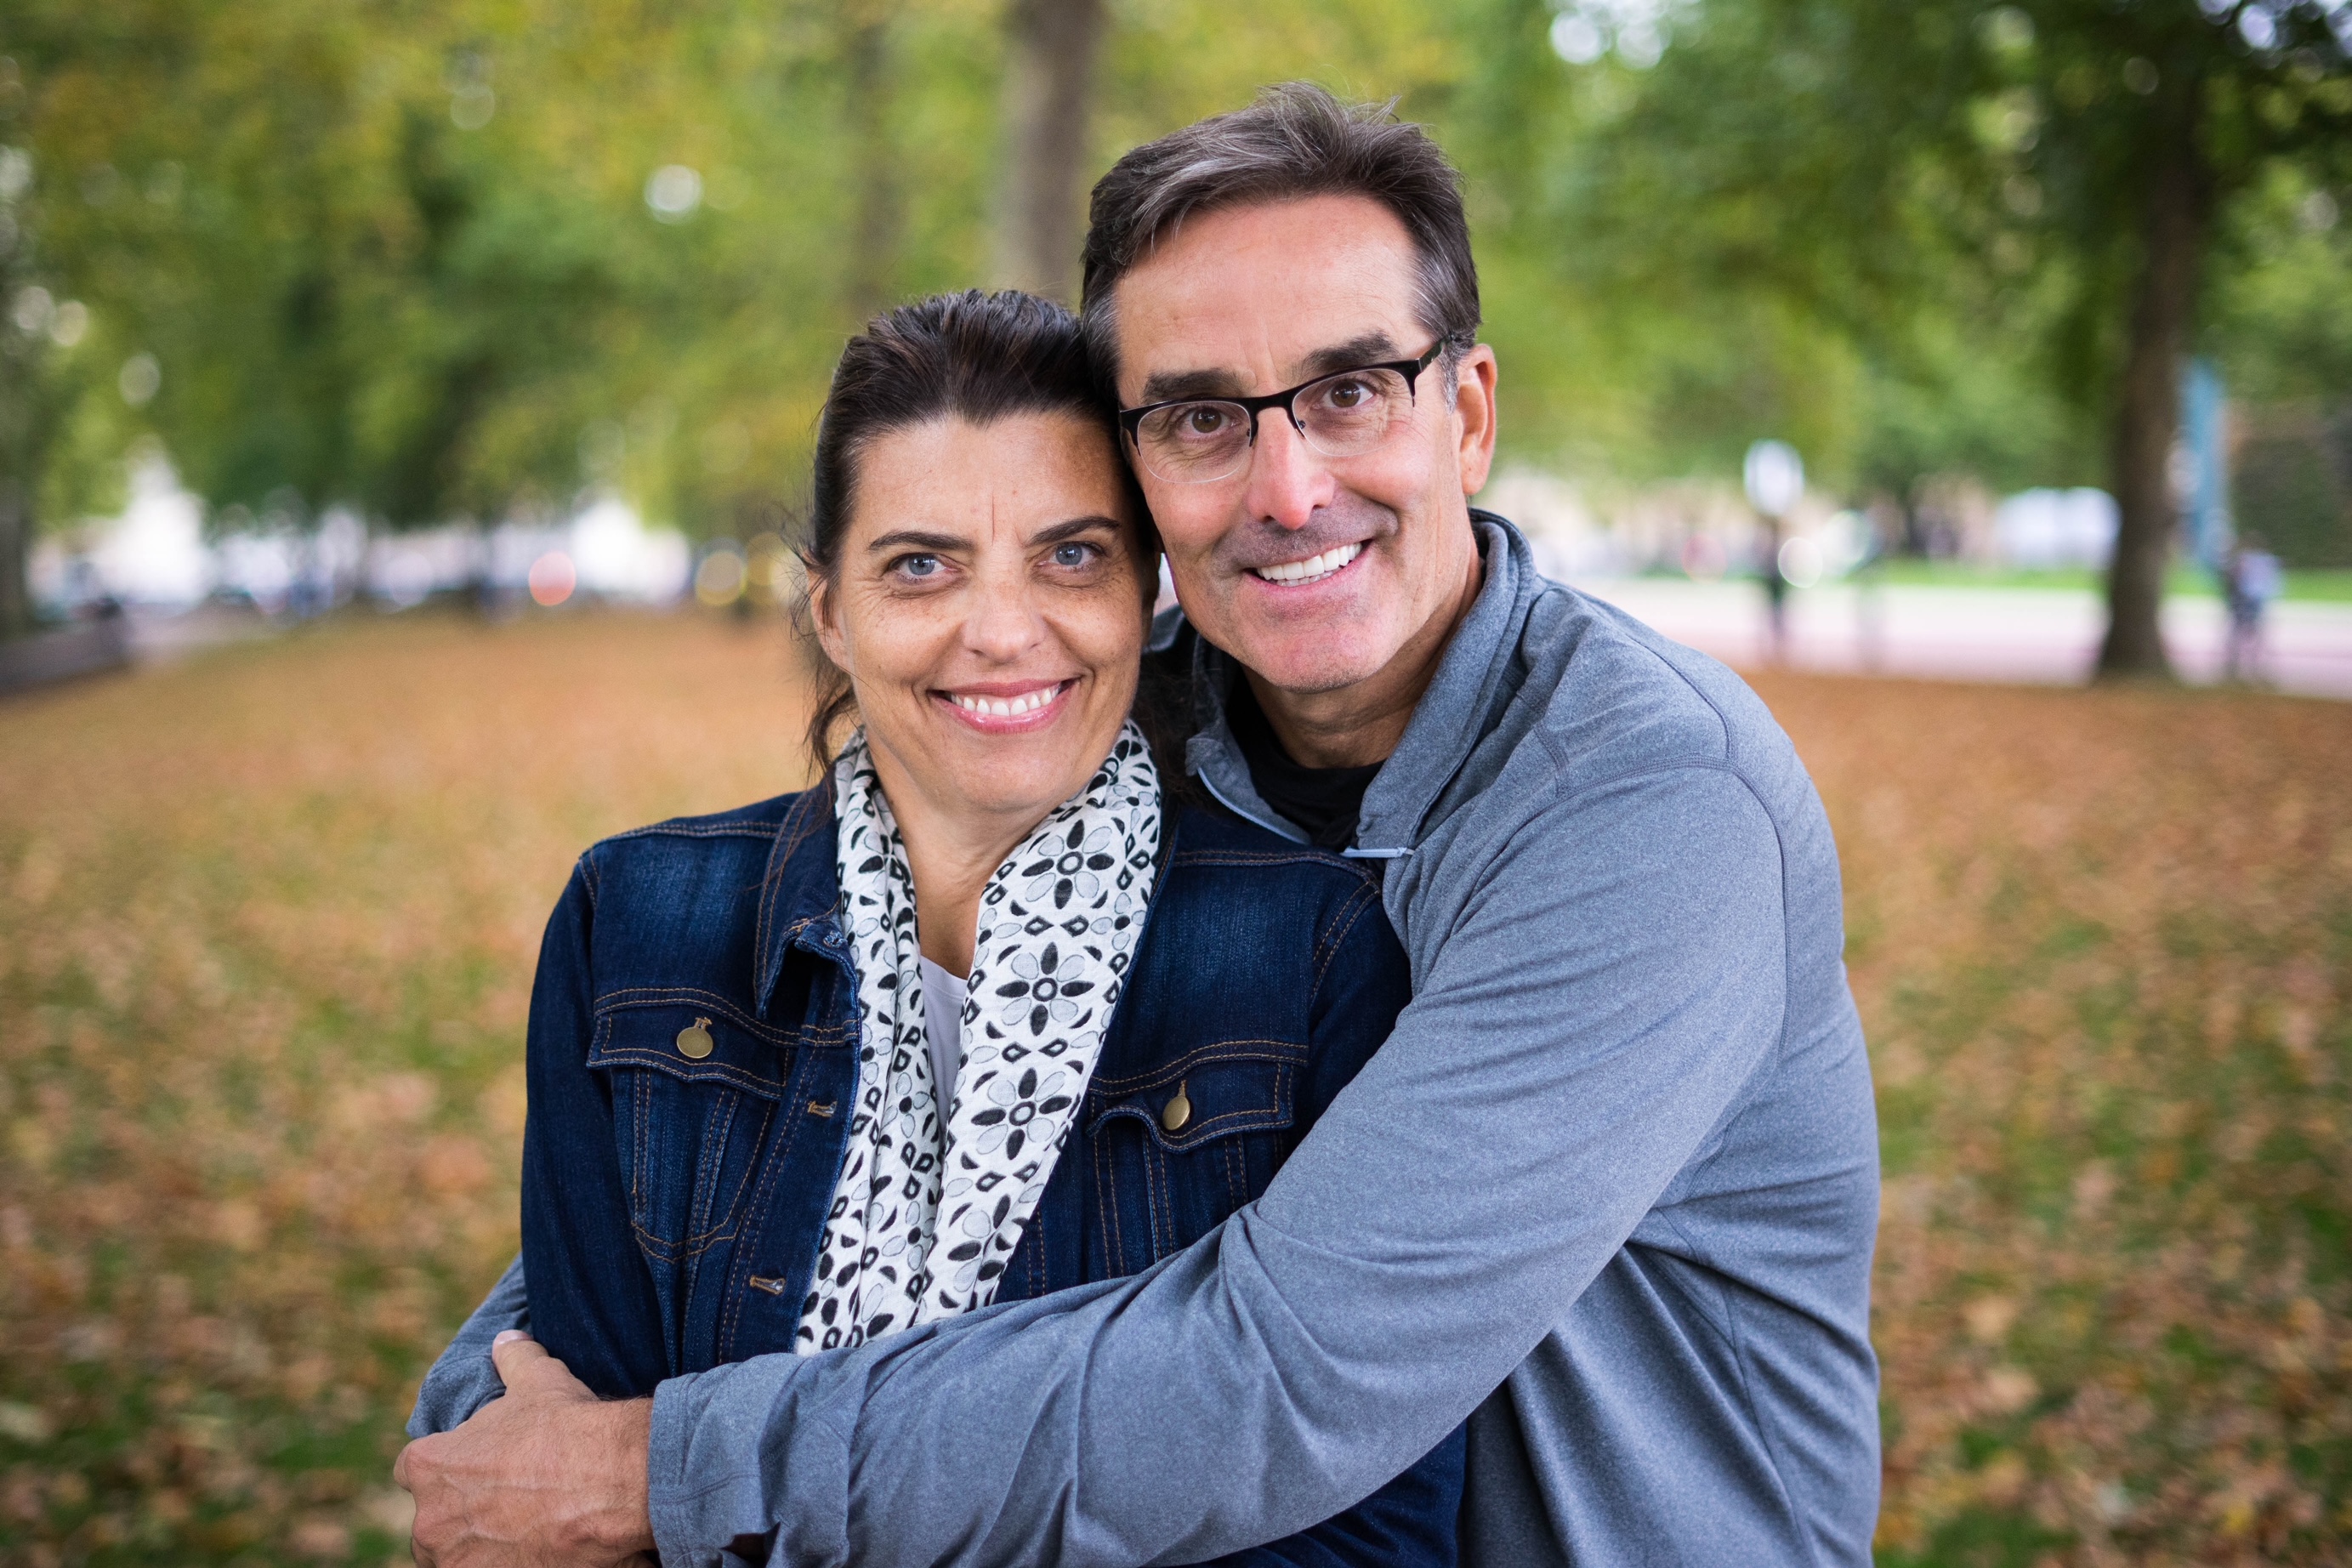 a woman and a man embrace and smile at the camera with a fall foliage scene in the background